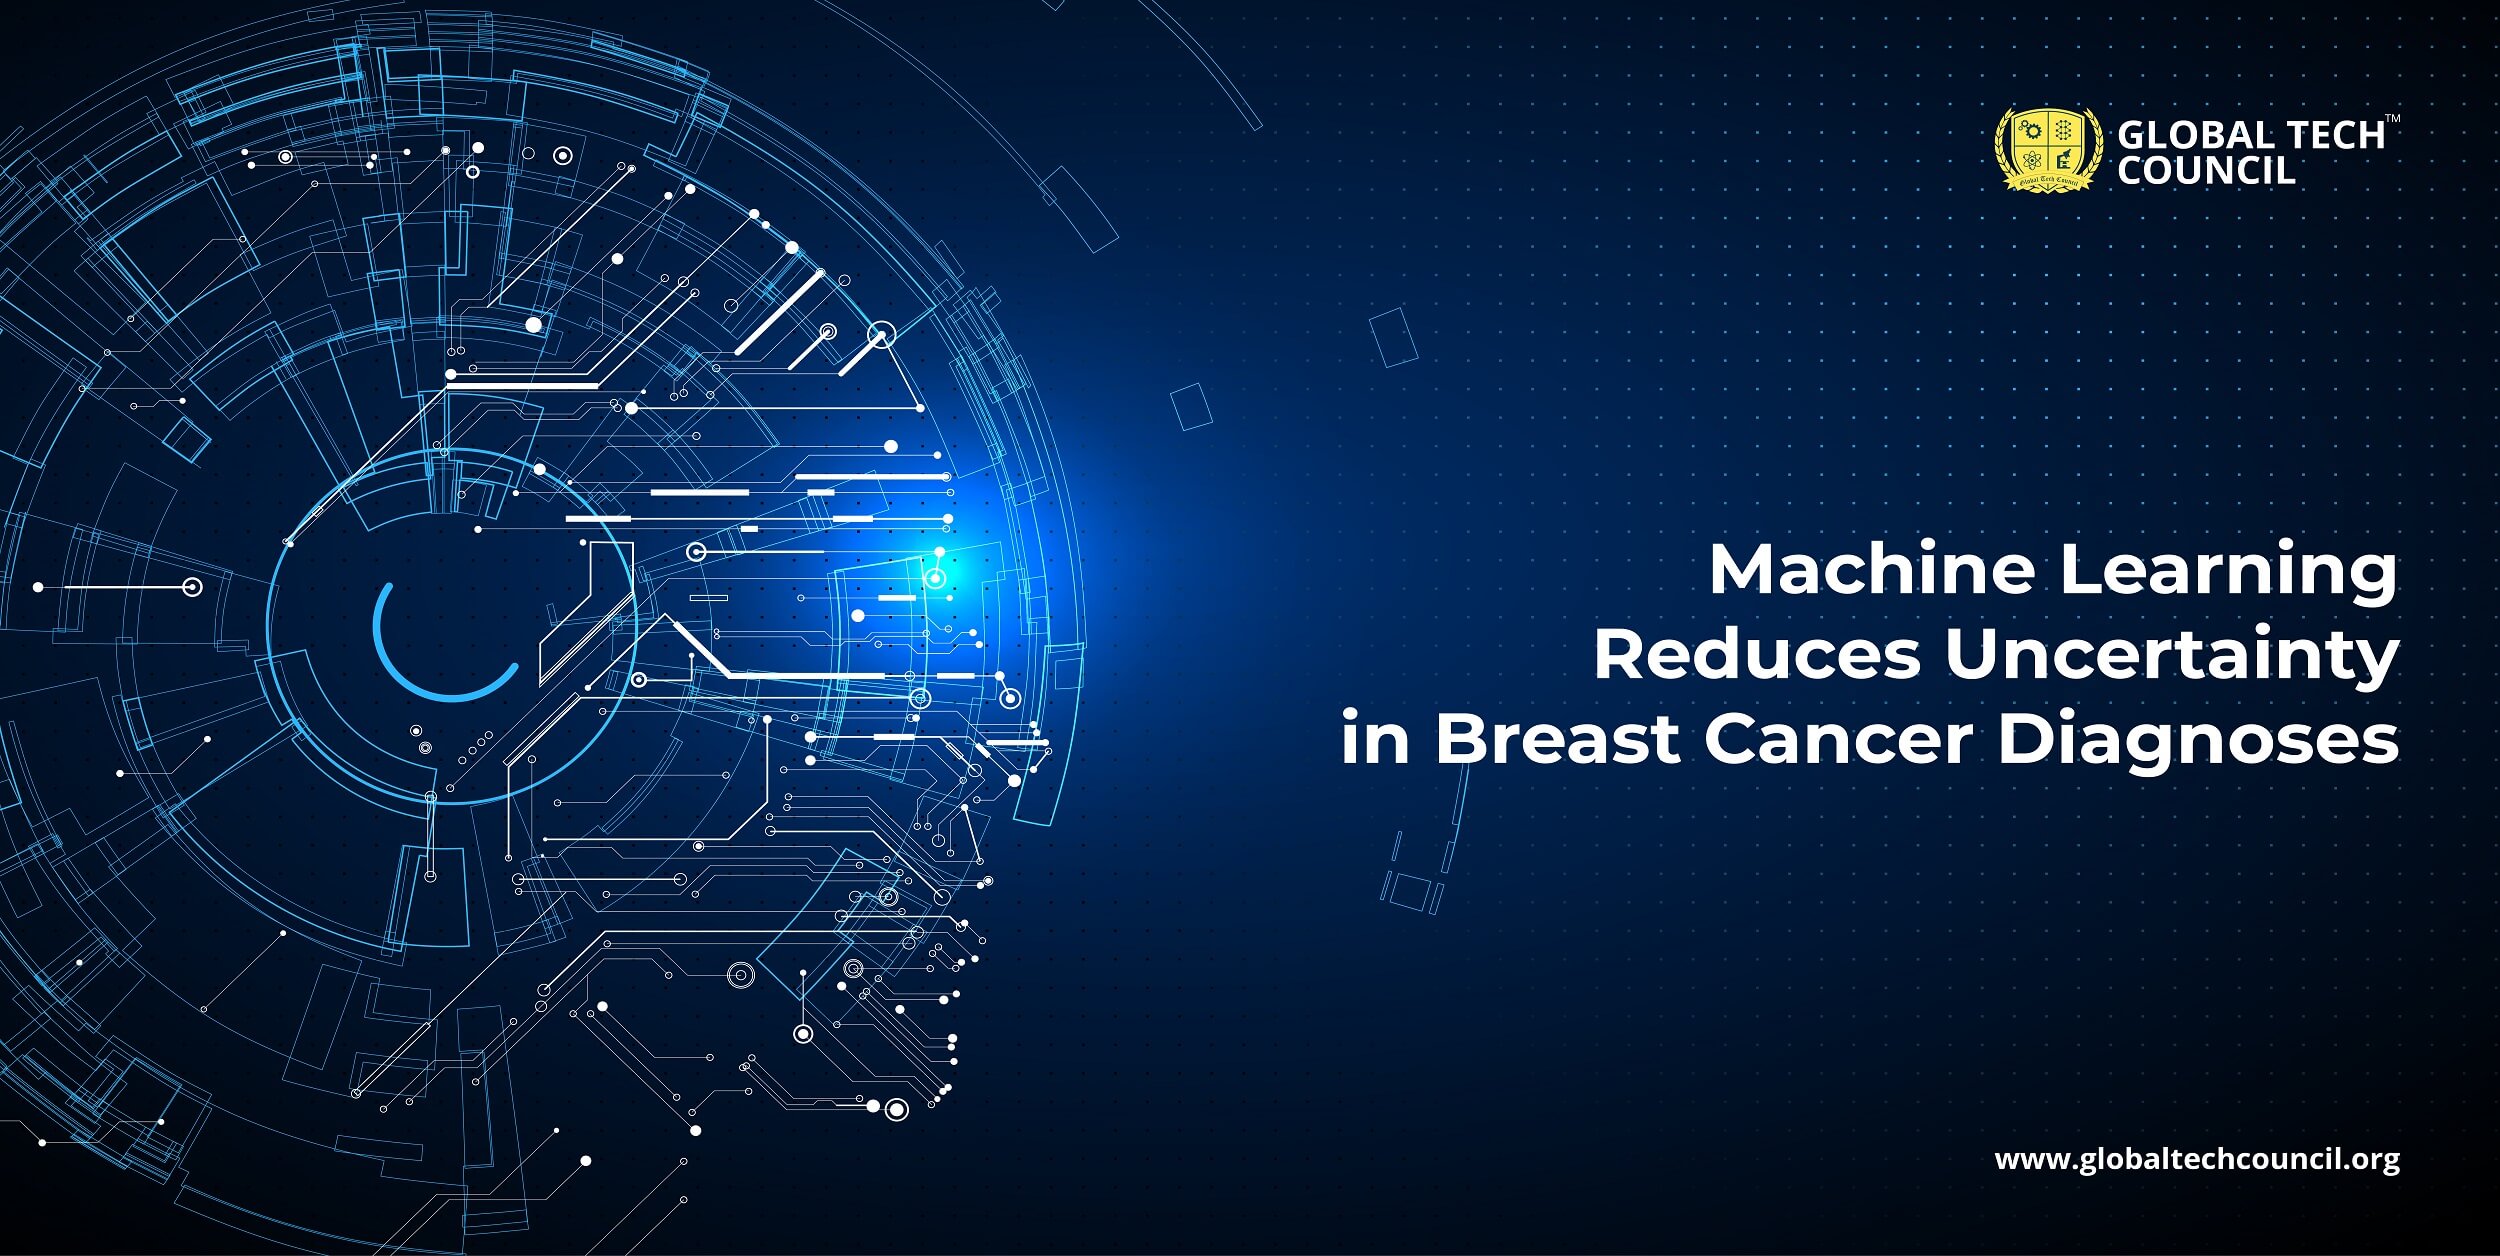 Machine Learning Reduces Uncertainty in Breast Cancer Diagnoses